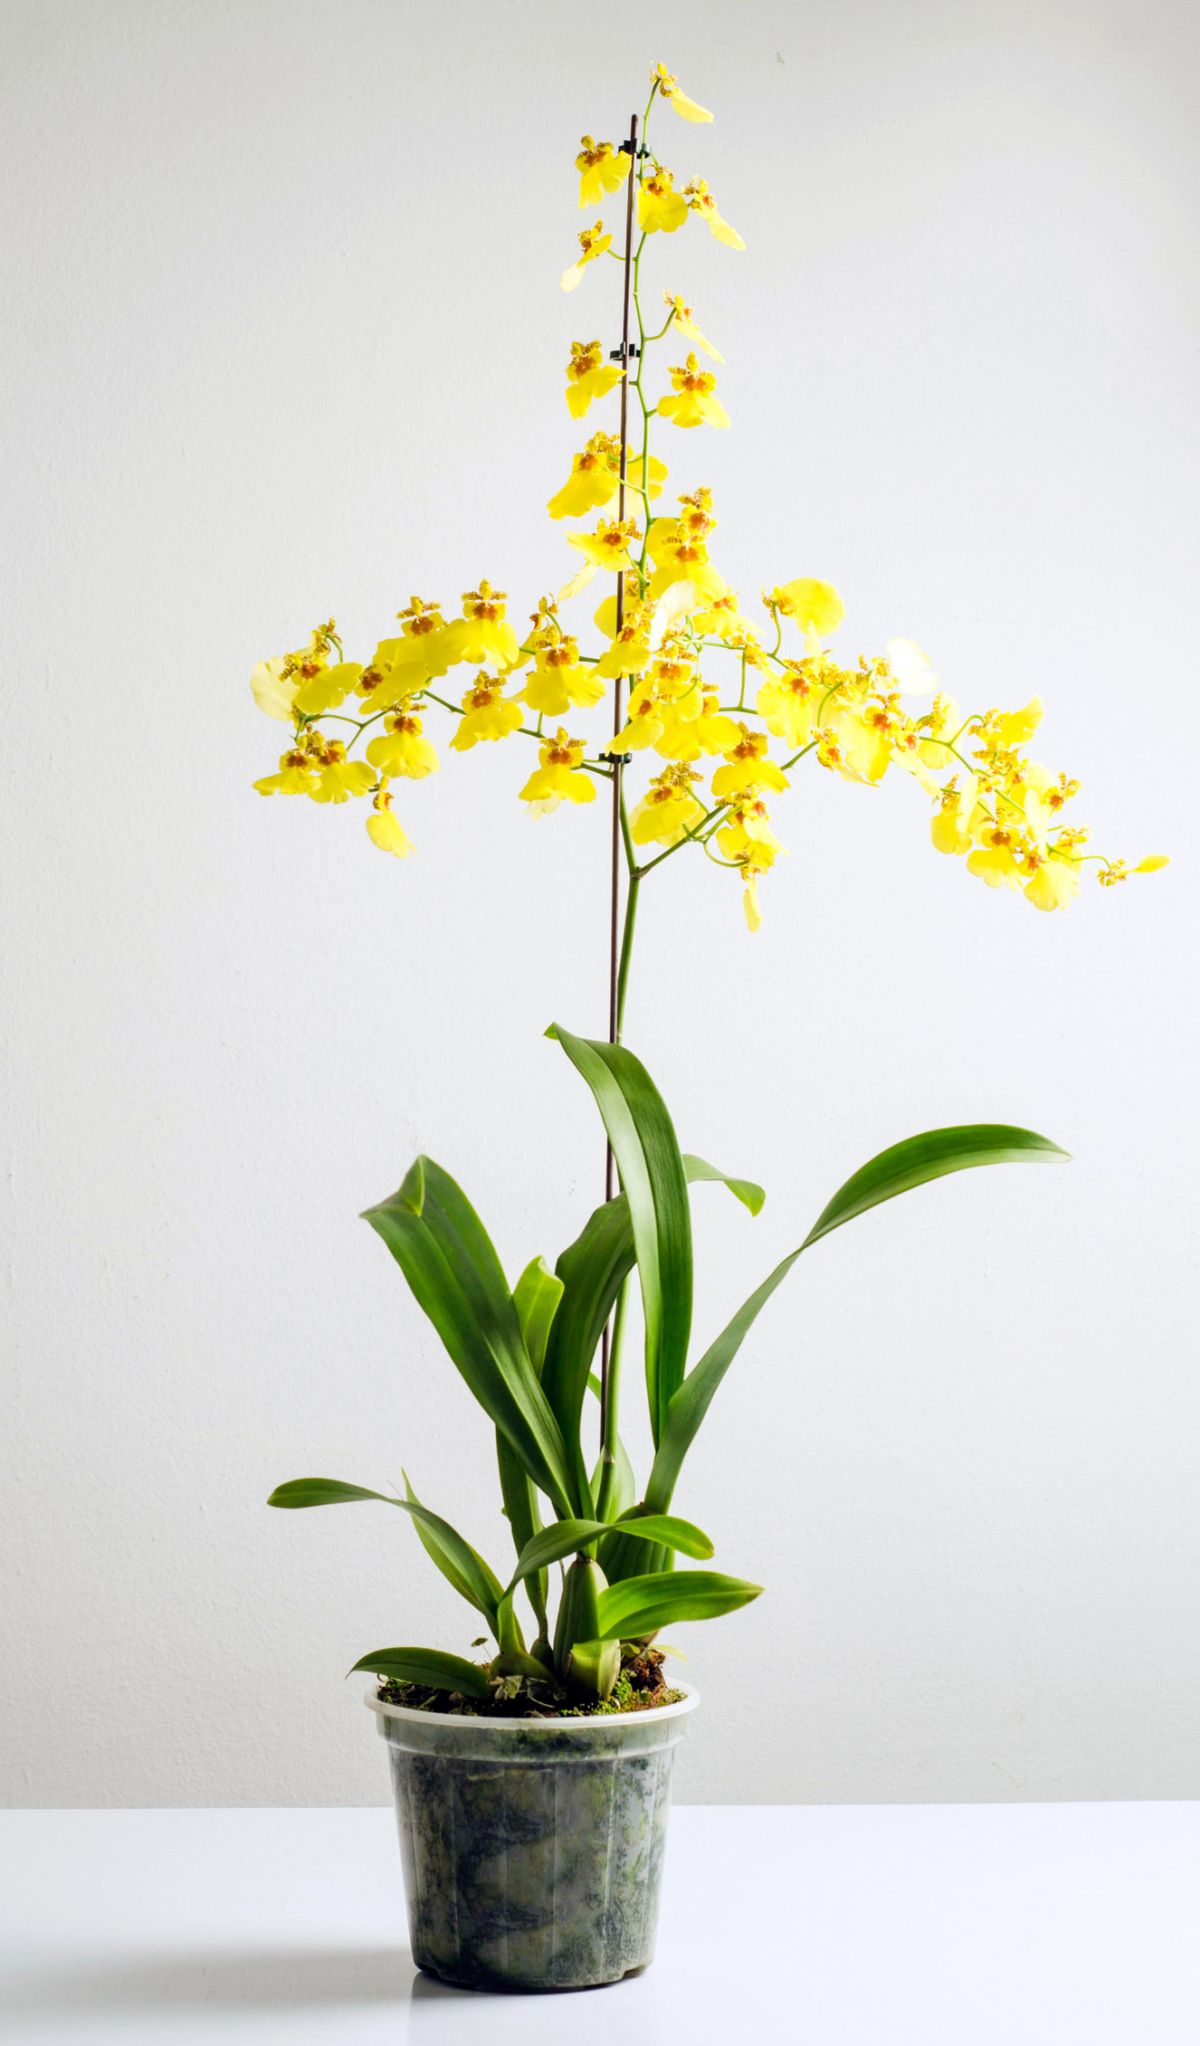 Oncidium Spp: A proper guide to growing and caring for oncidium orchids